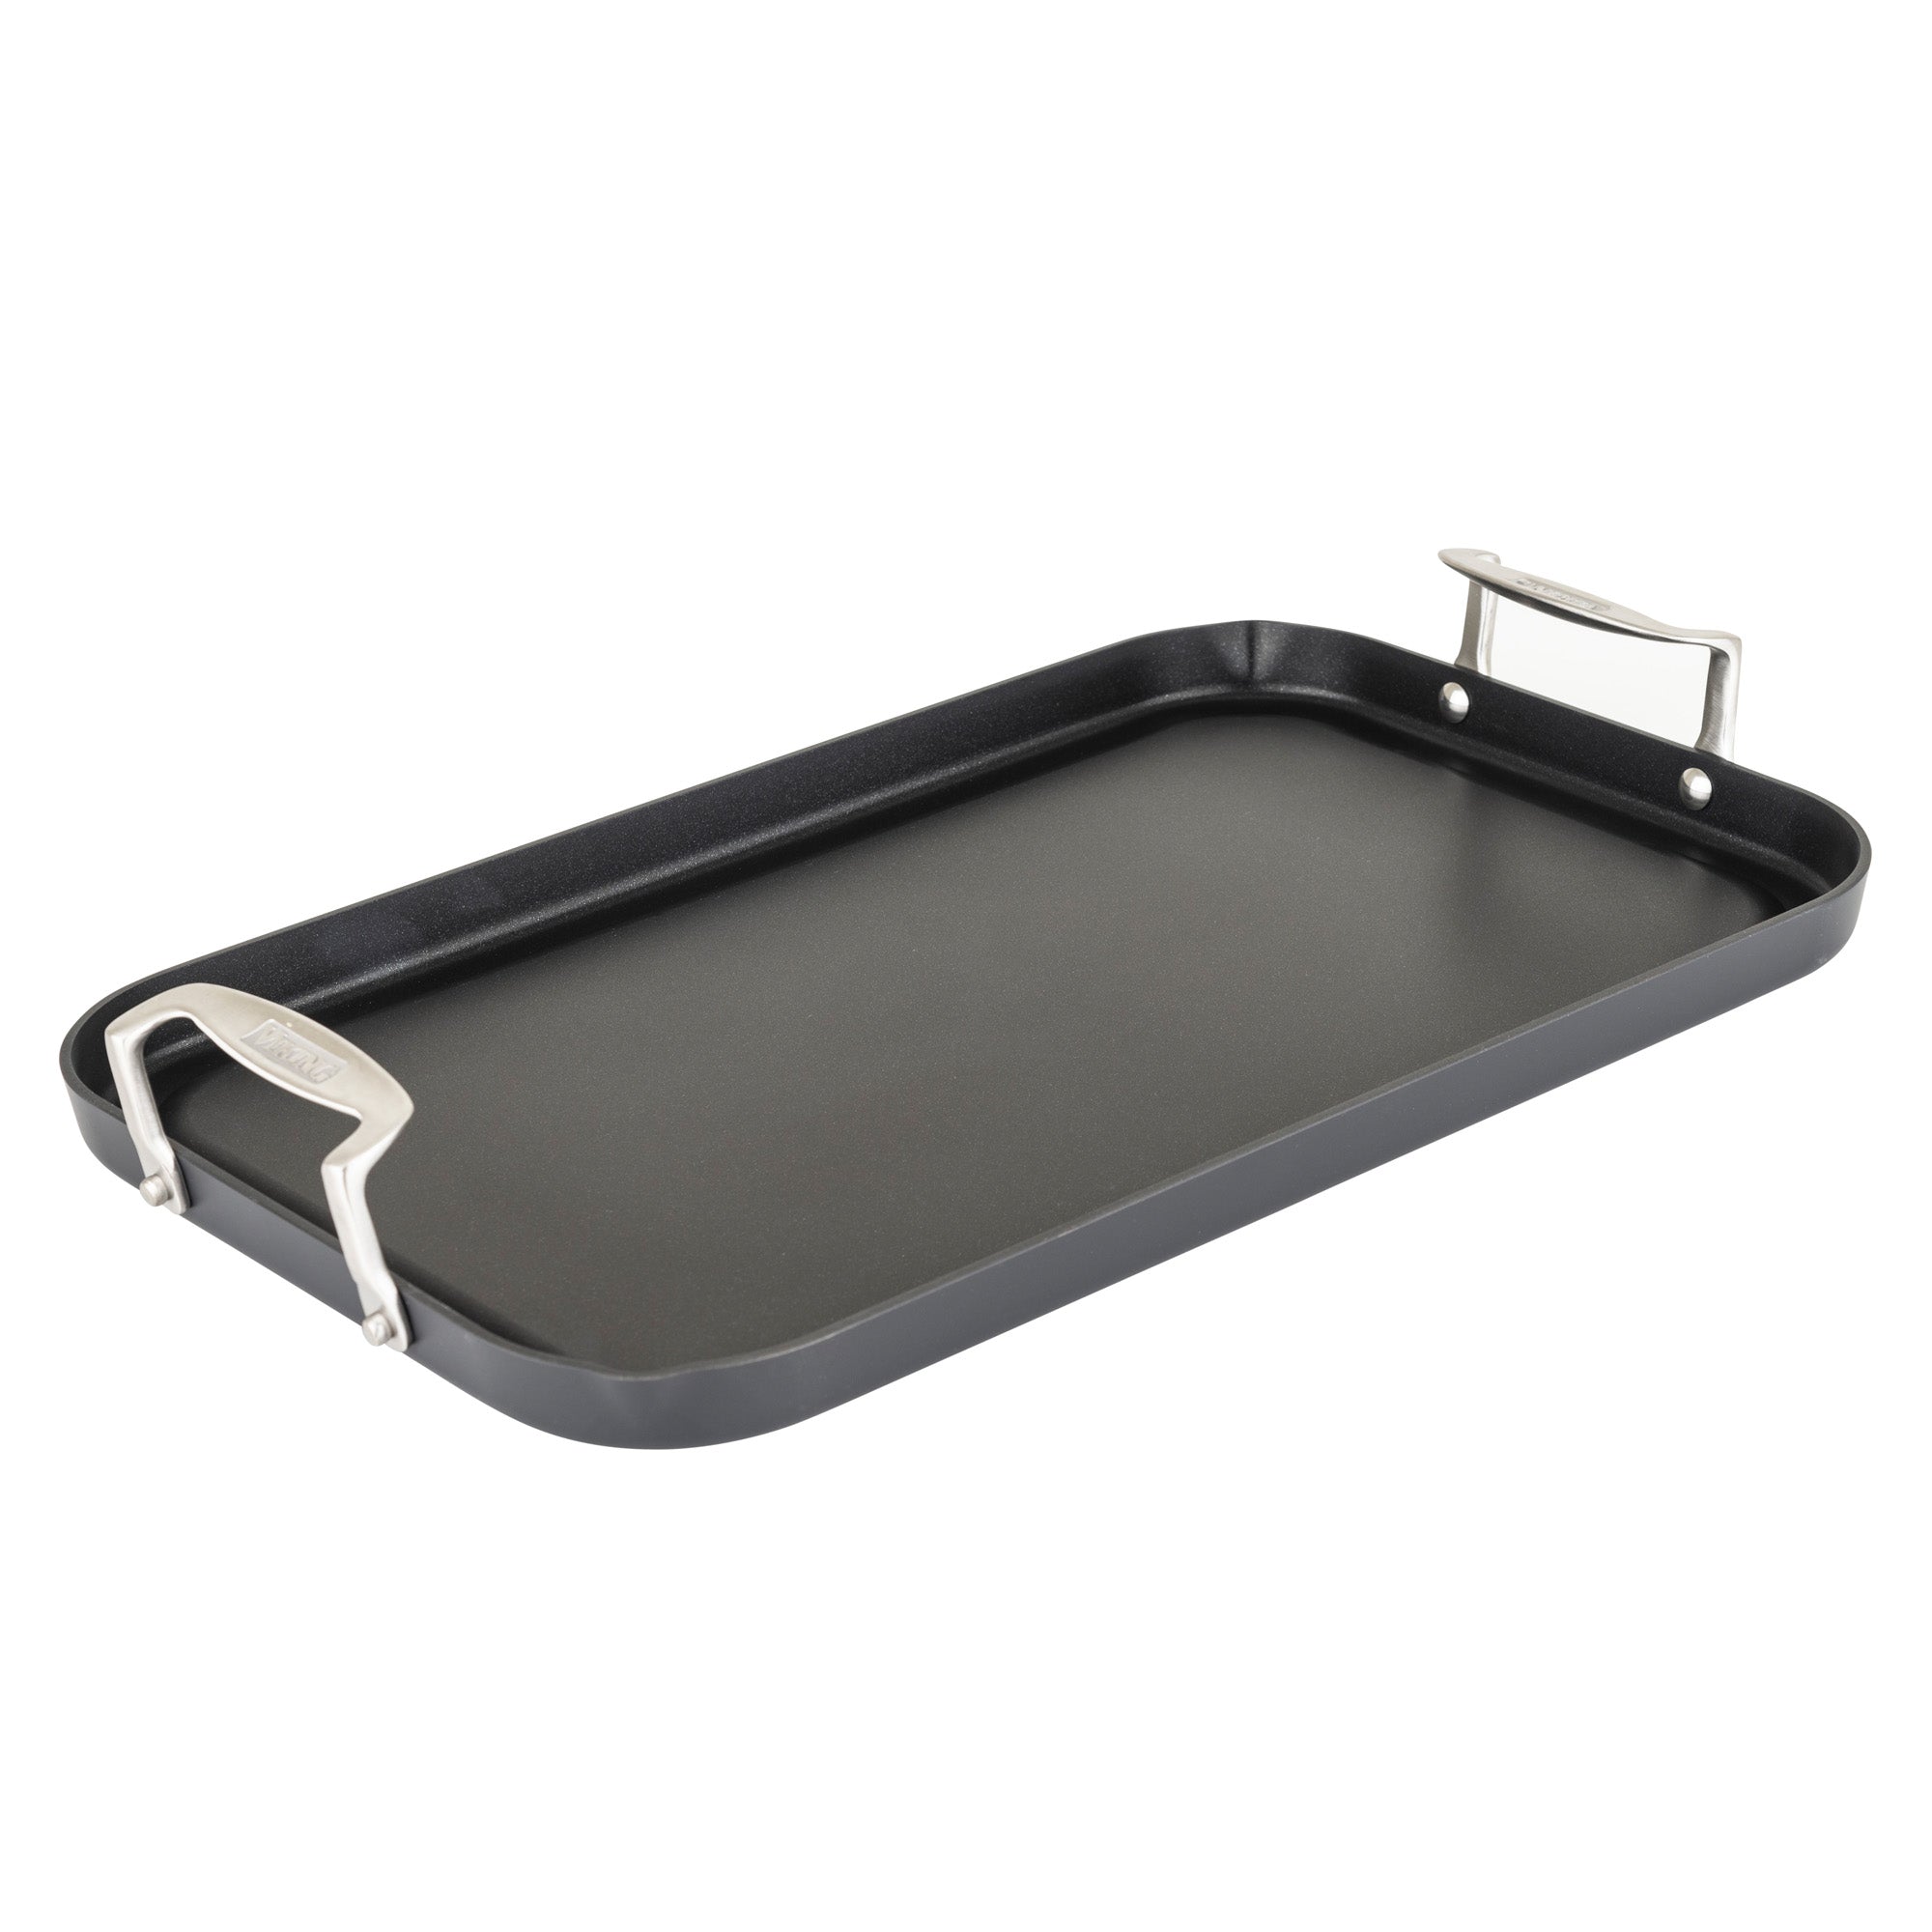 Stainless Steel Nonstick Double Burner Griddle Pan for Stove Top